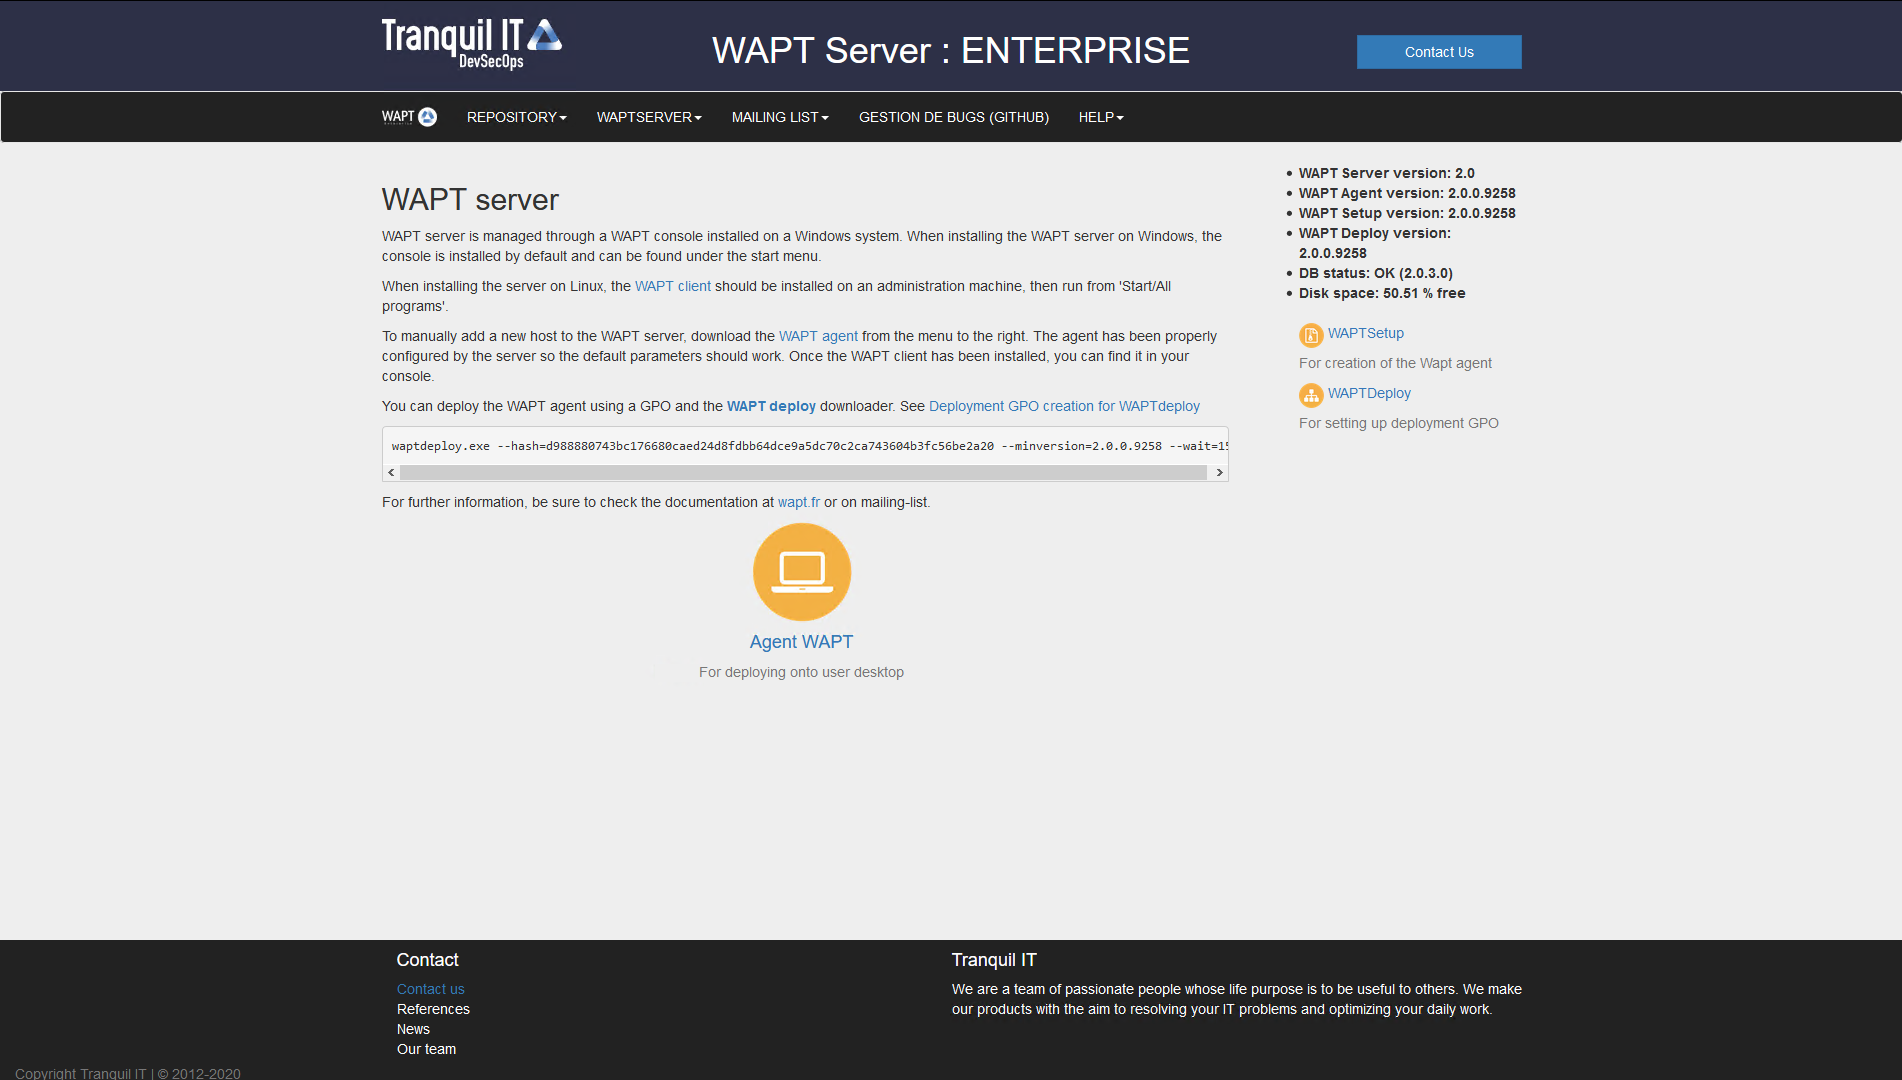 The WAPT Server interface in a web browser